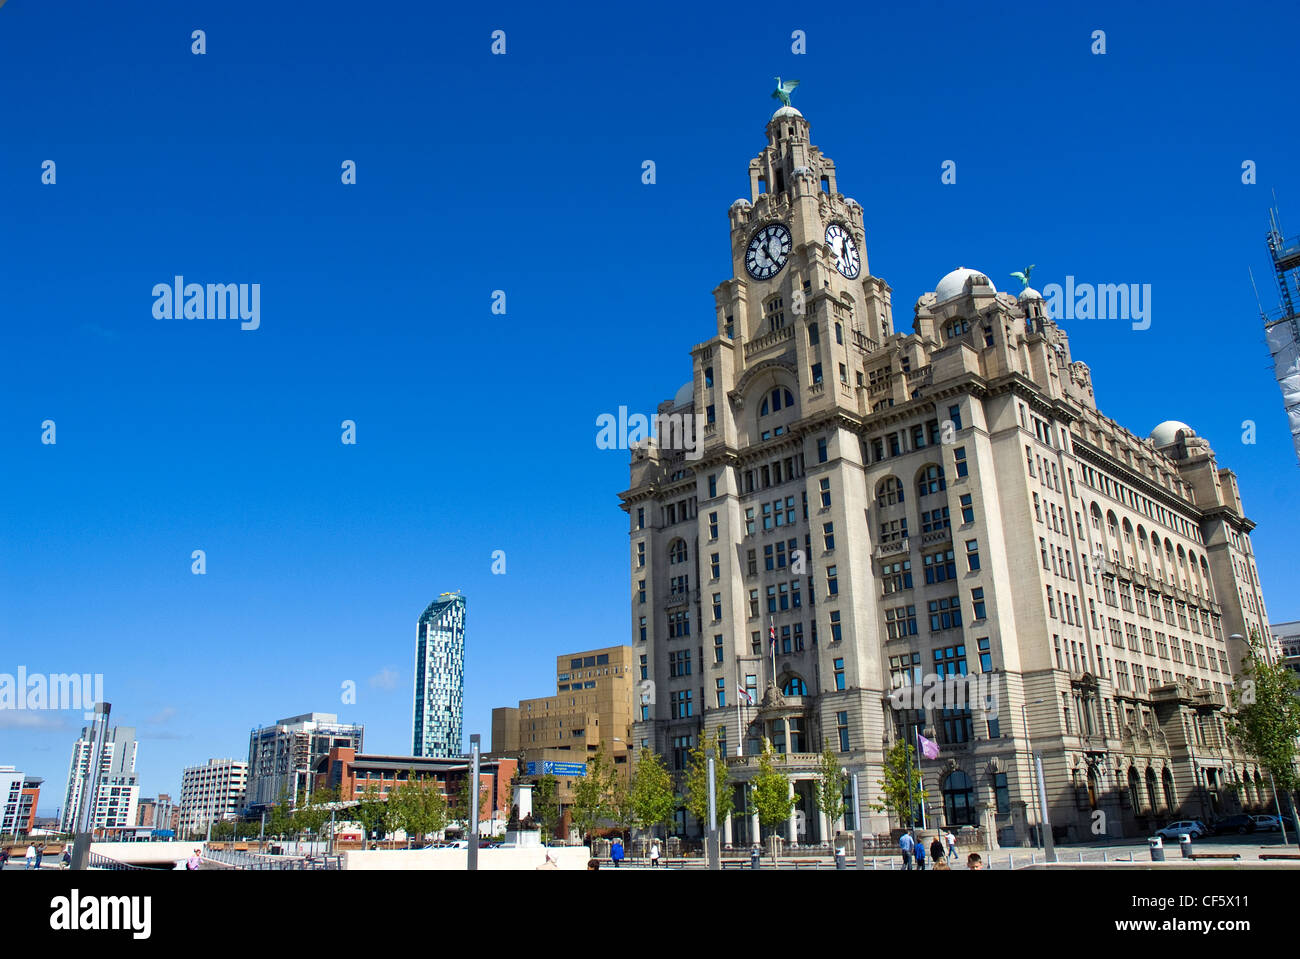 The Royal Liver Building on the Pier Head in Liverpool. It is one of Liverpool's Three Graces. Stock Photo